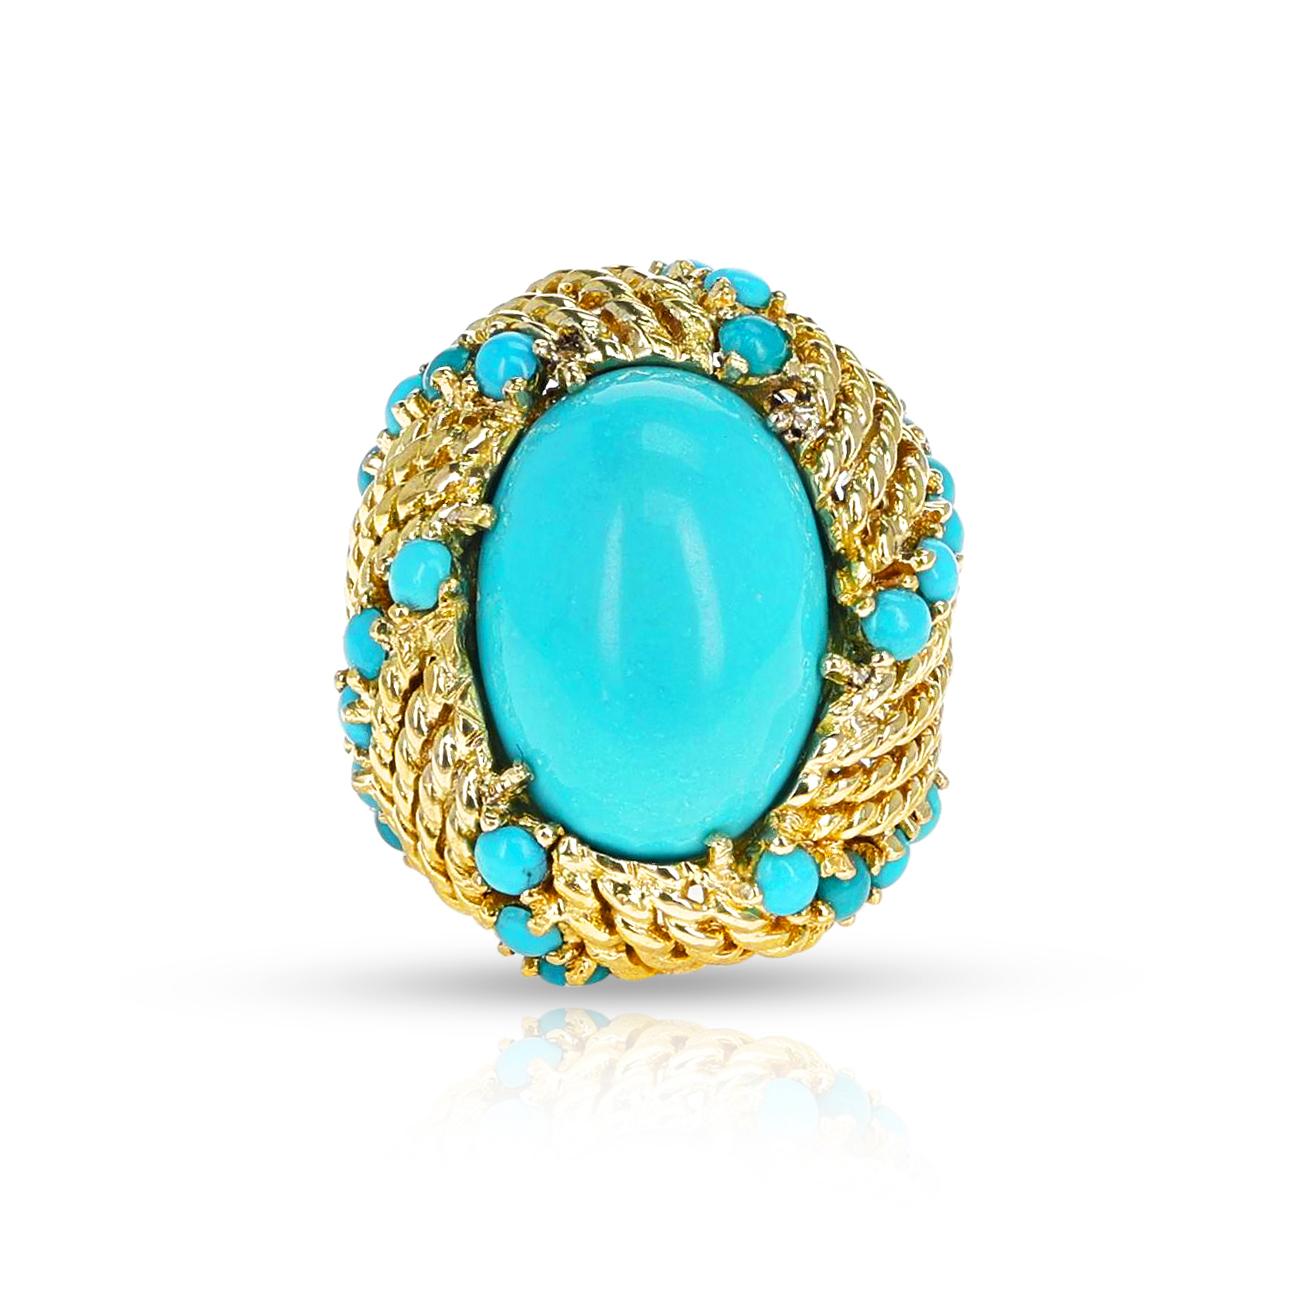 Turquoise Cabochon Cocktail Ring with Rope-Work Gold, 18k For Sale 1